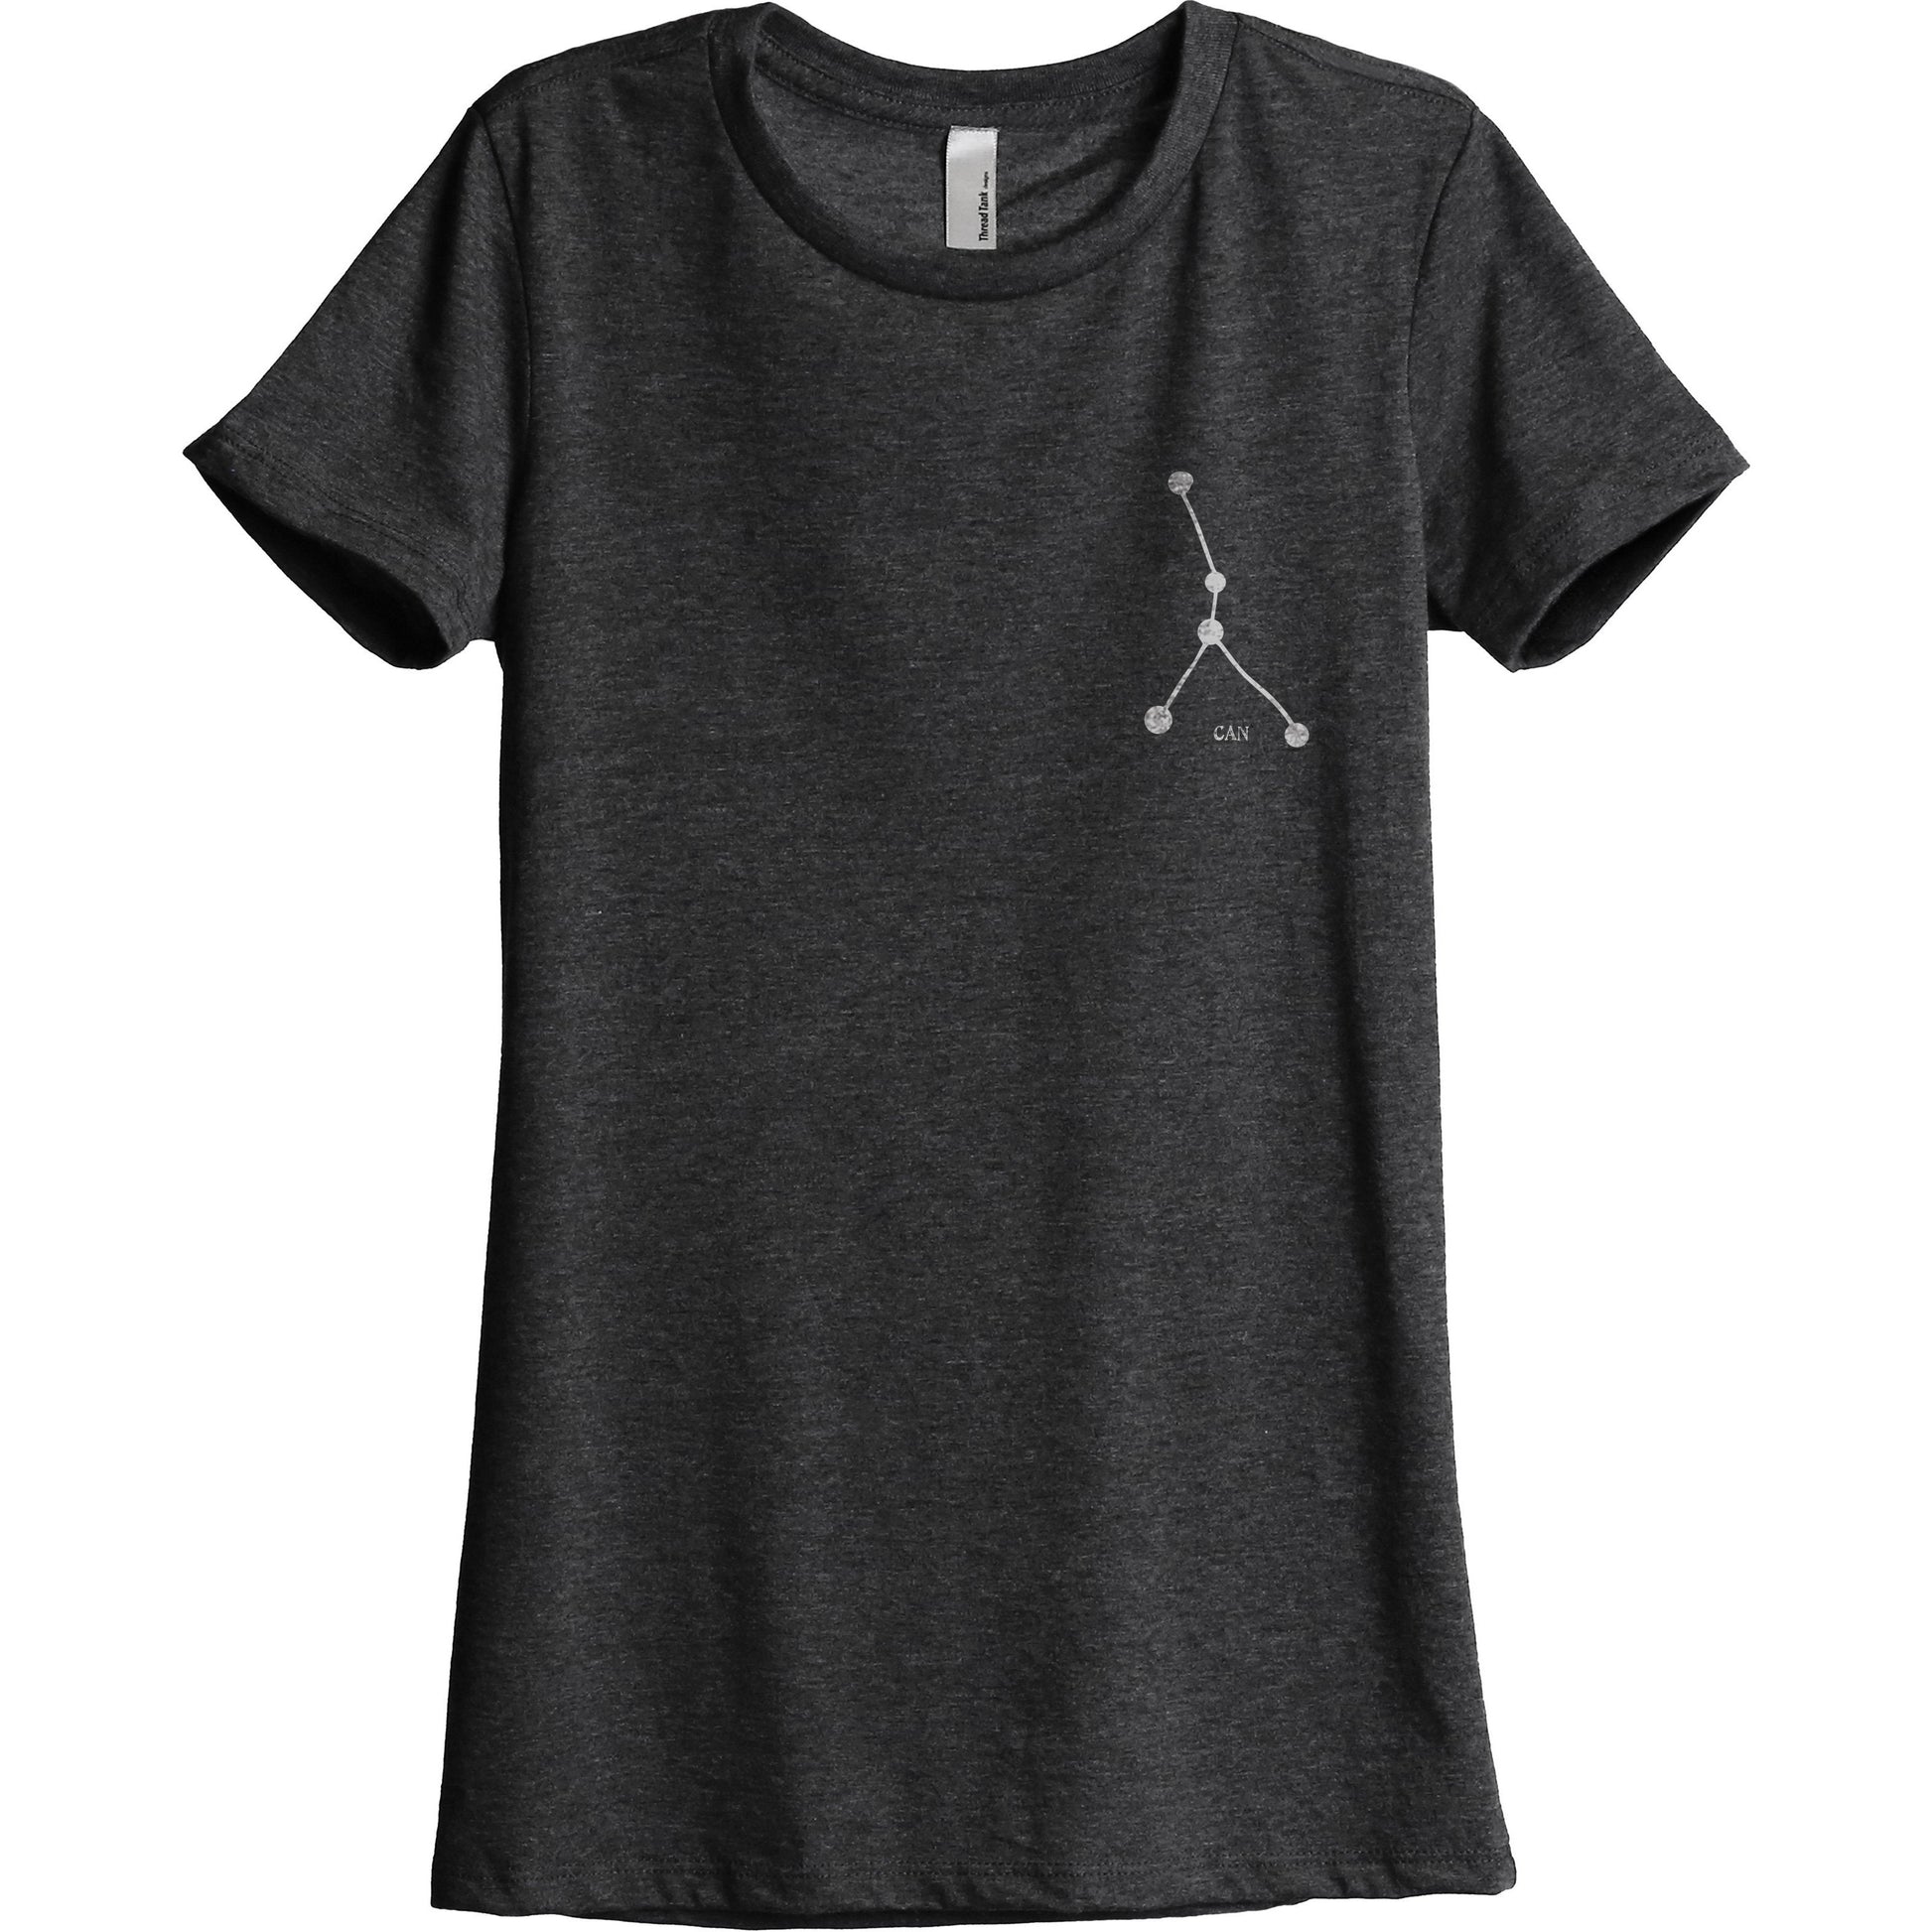 Cancer CAN Constellation Astrology Women's Relaxed Crewneck T-Shirt Top Tee Charcoal Grey
